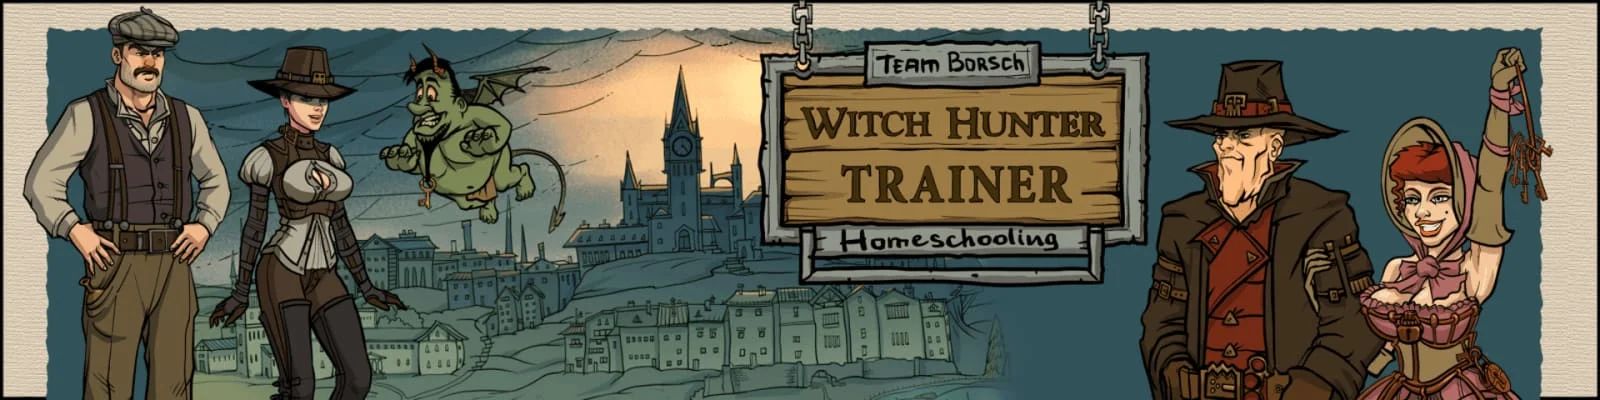 Witch Hunter Trainer Worms and dwarfes 1 (June 2022)